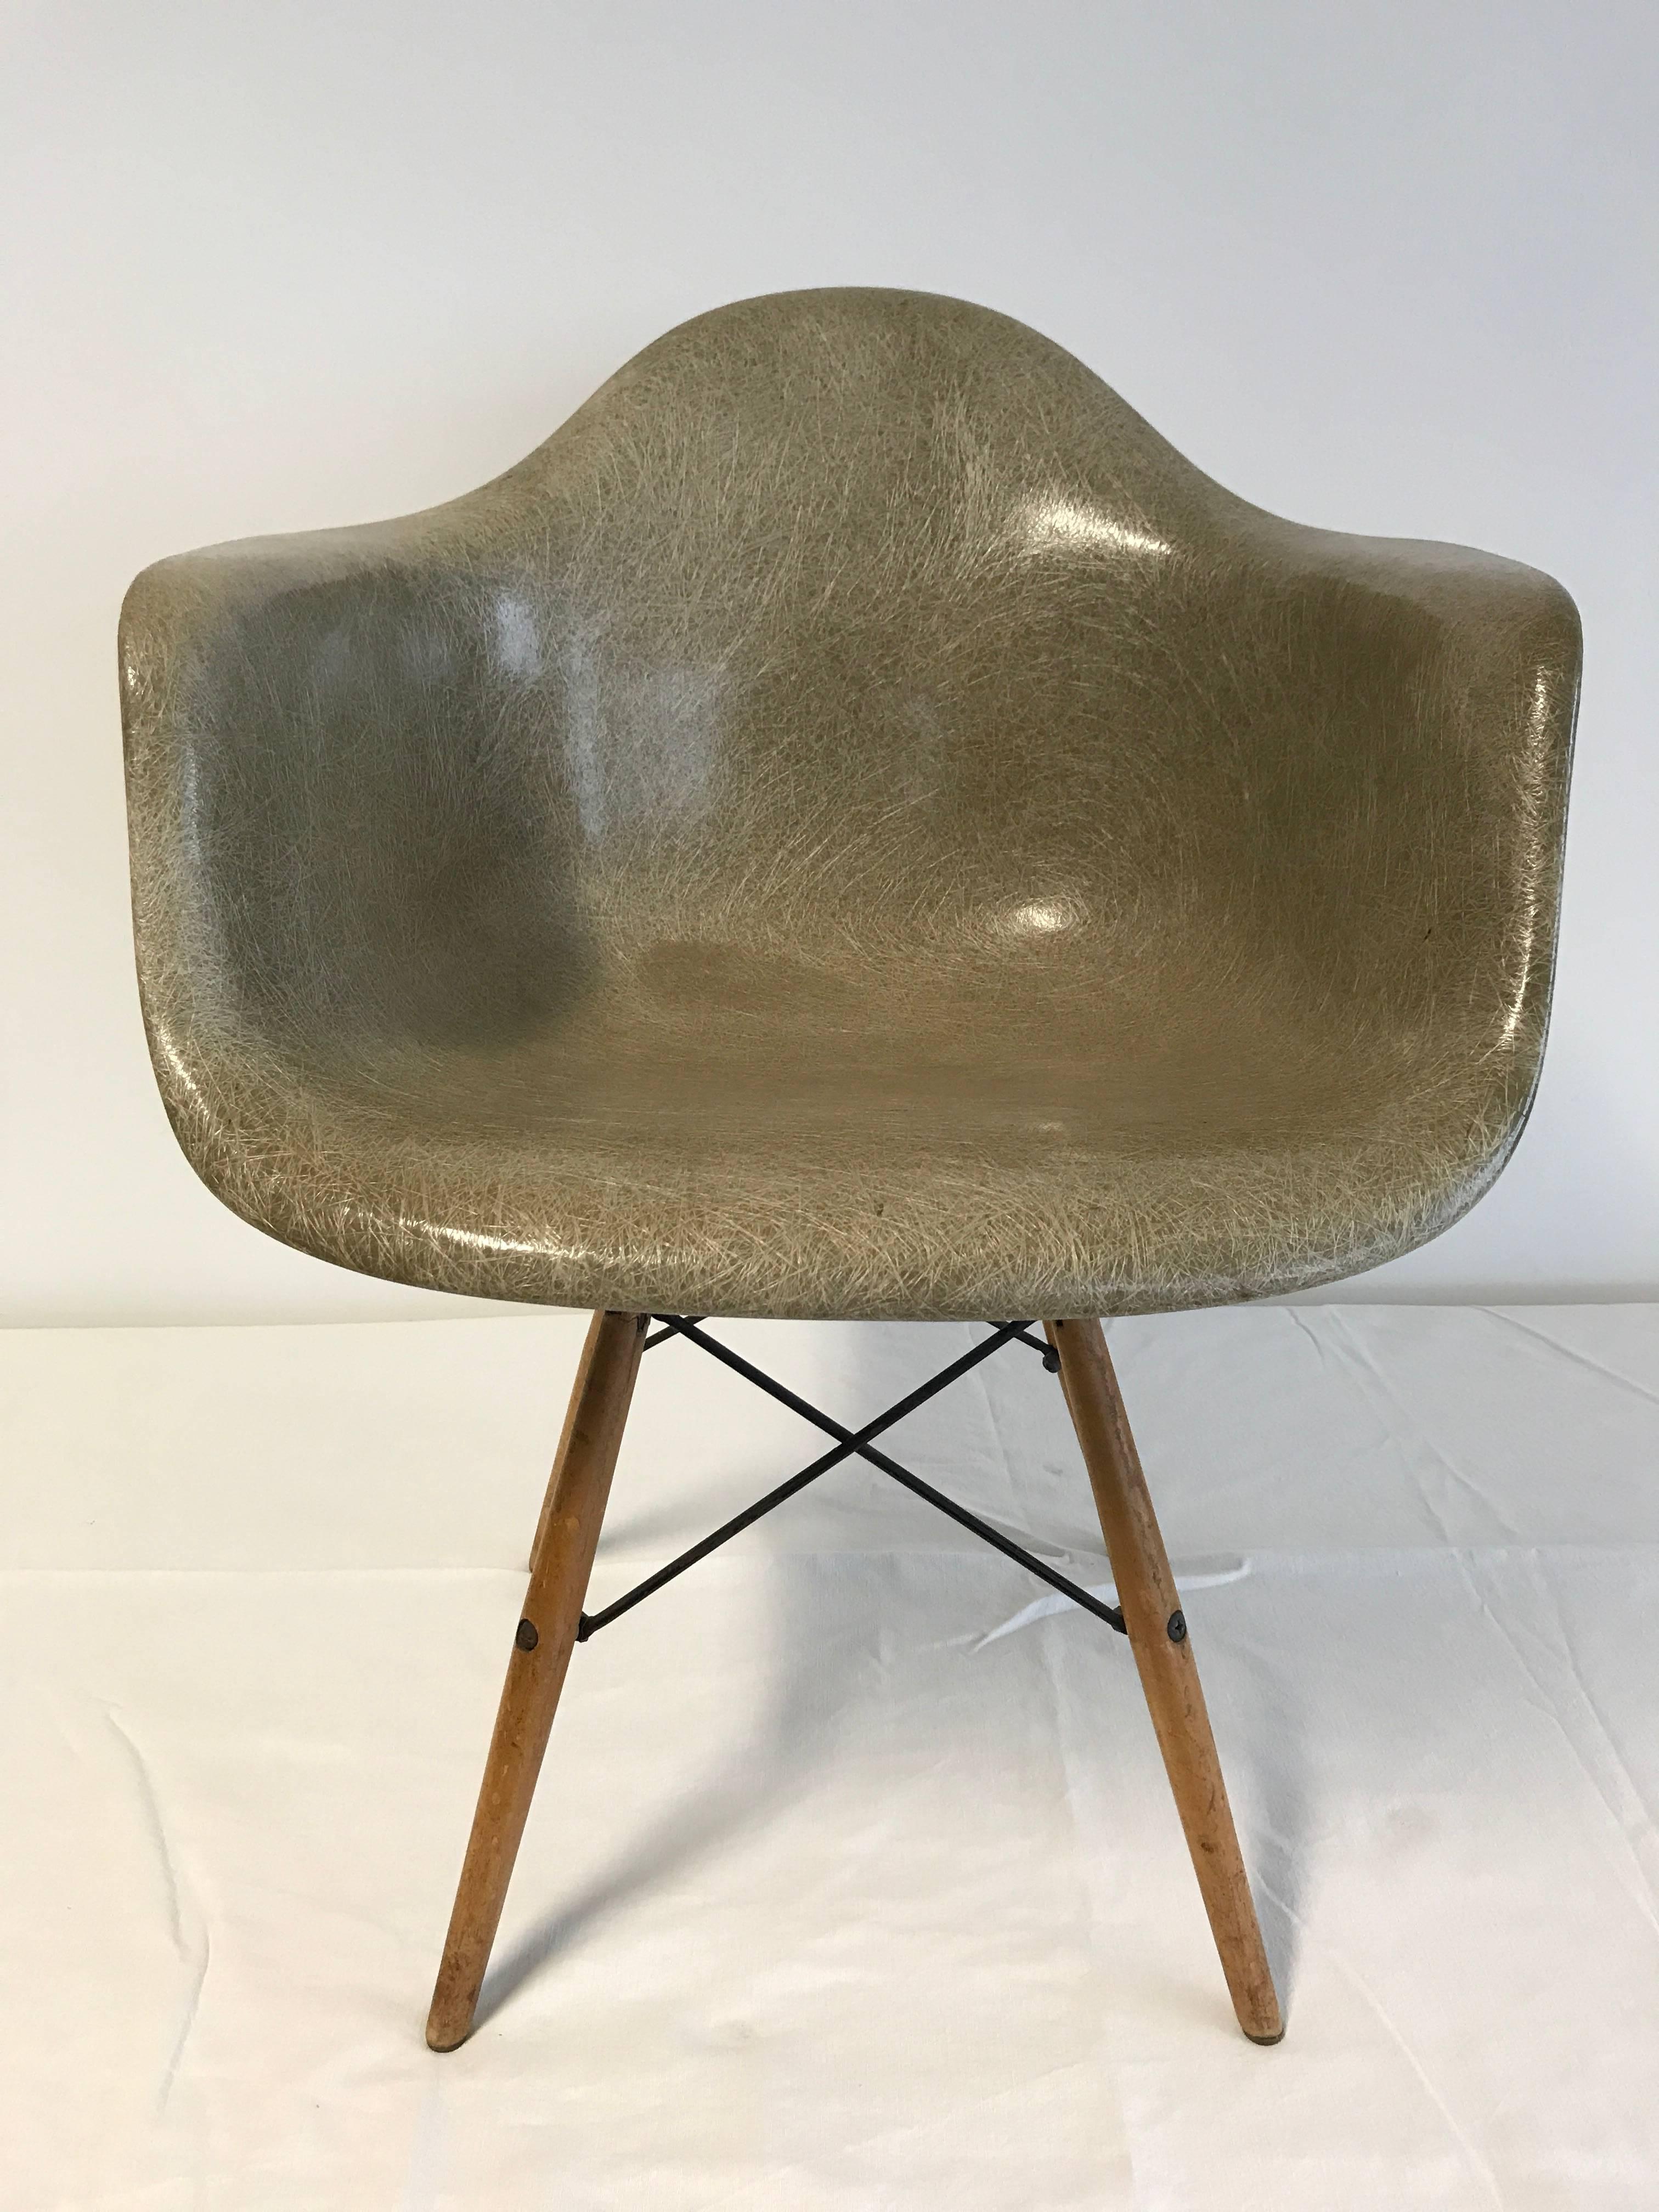 Première production / première génération 1949-1950 Zenith Herman Miller / Charles Eames PAW rope swivel chair in color grey elephant / dowel legs in birch / all original parts / the awesome dowel base reads Seng Chicago on the metal portion/ fibre